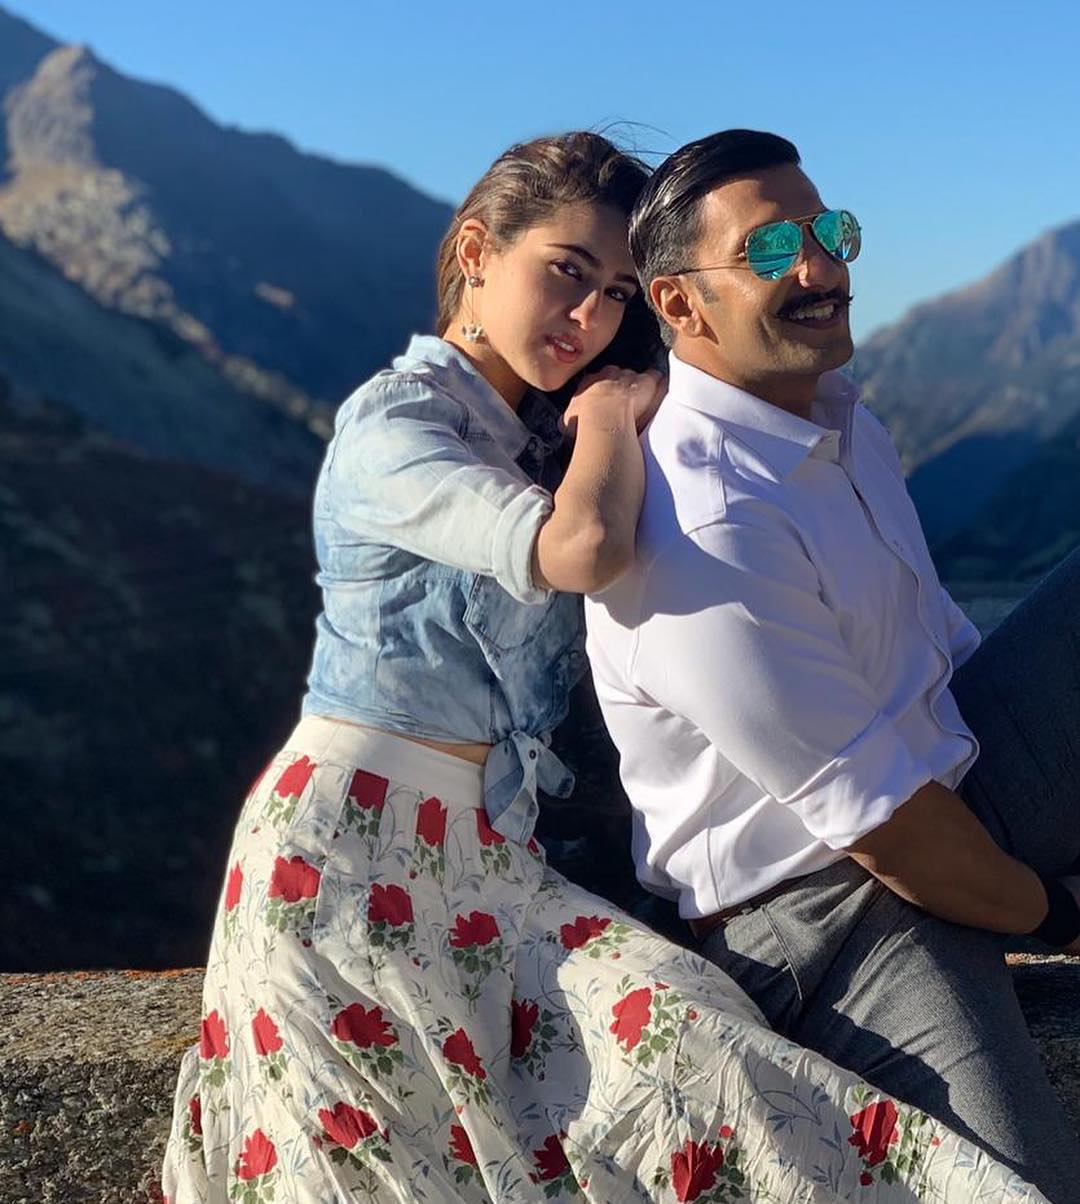 Sara Ali Khan and Ranveer Singh pose for a picture during the shoot of their film